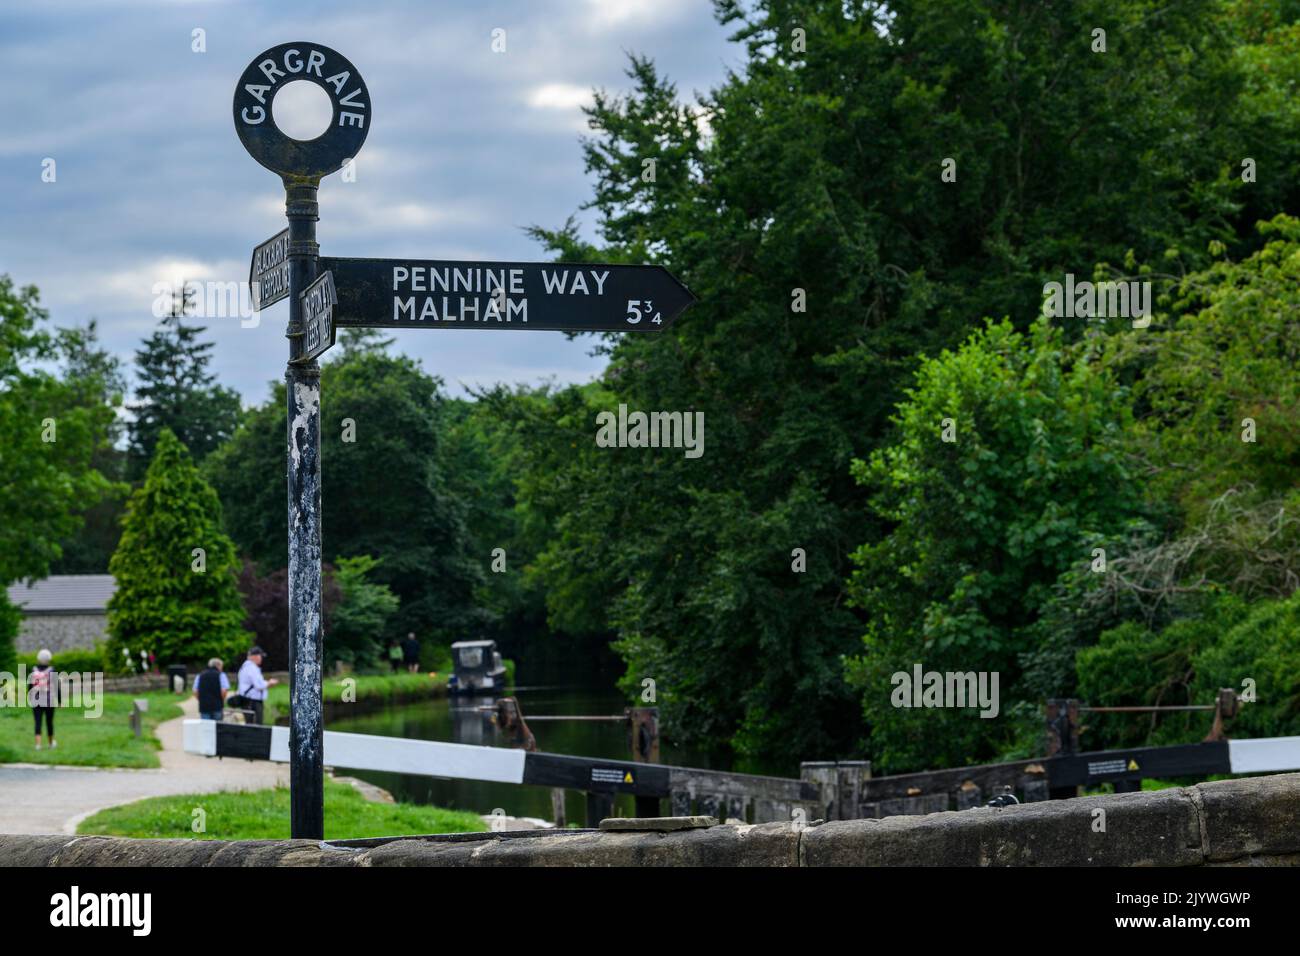 Waymark sign pointing to Pennine Way footpath route by canal lock & people walking - Leeds and Liverpool Canal, Gargrave, North Yorkshire, England UK. Stock Photo